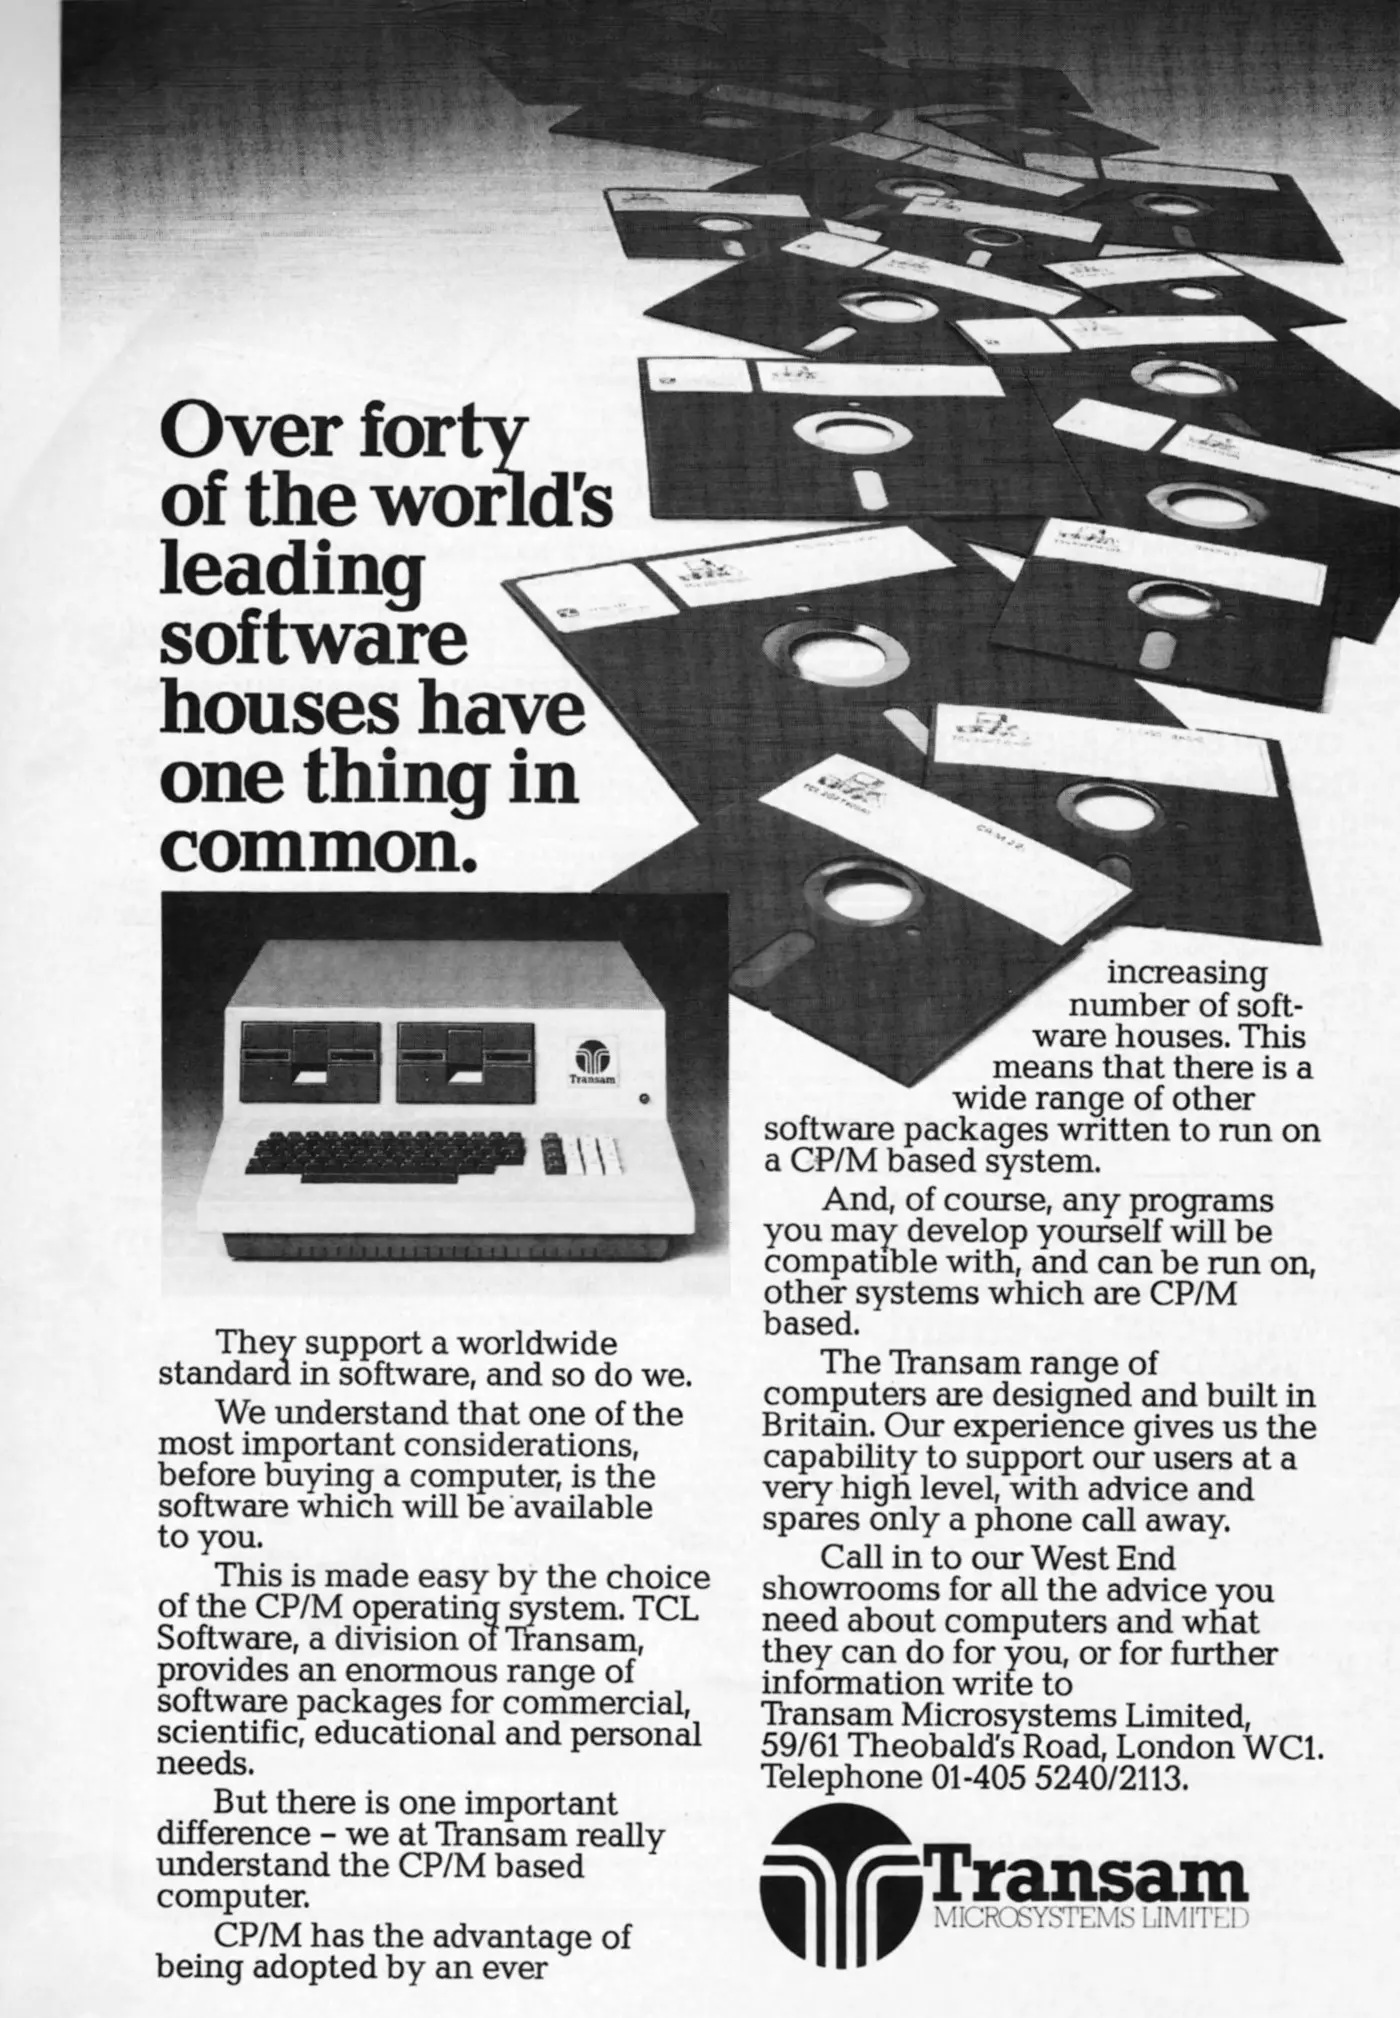 Transam Advert: Over forty of the world's leading software houses have one thing in common - Transam Microsystems, from Personal Computer World, July 1982